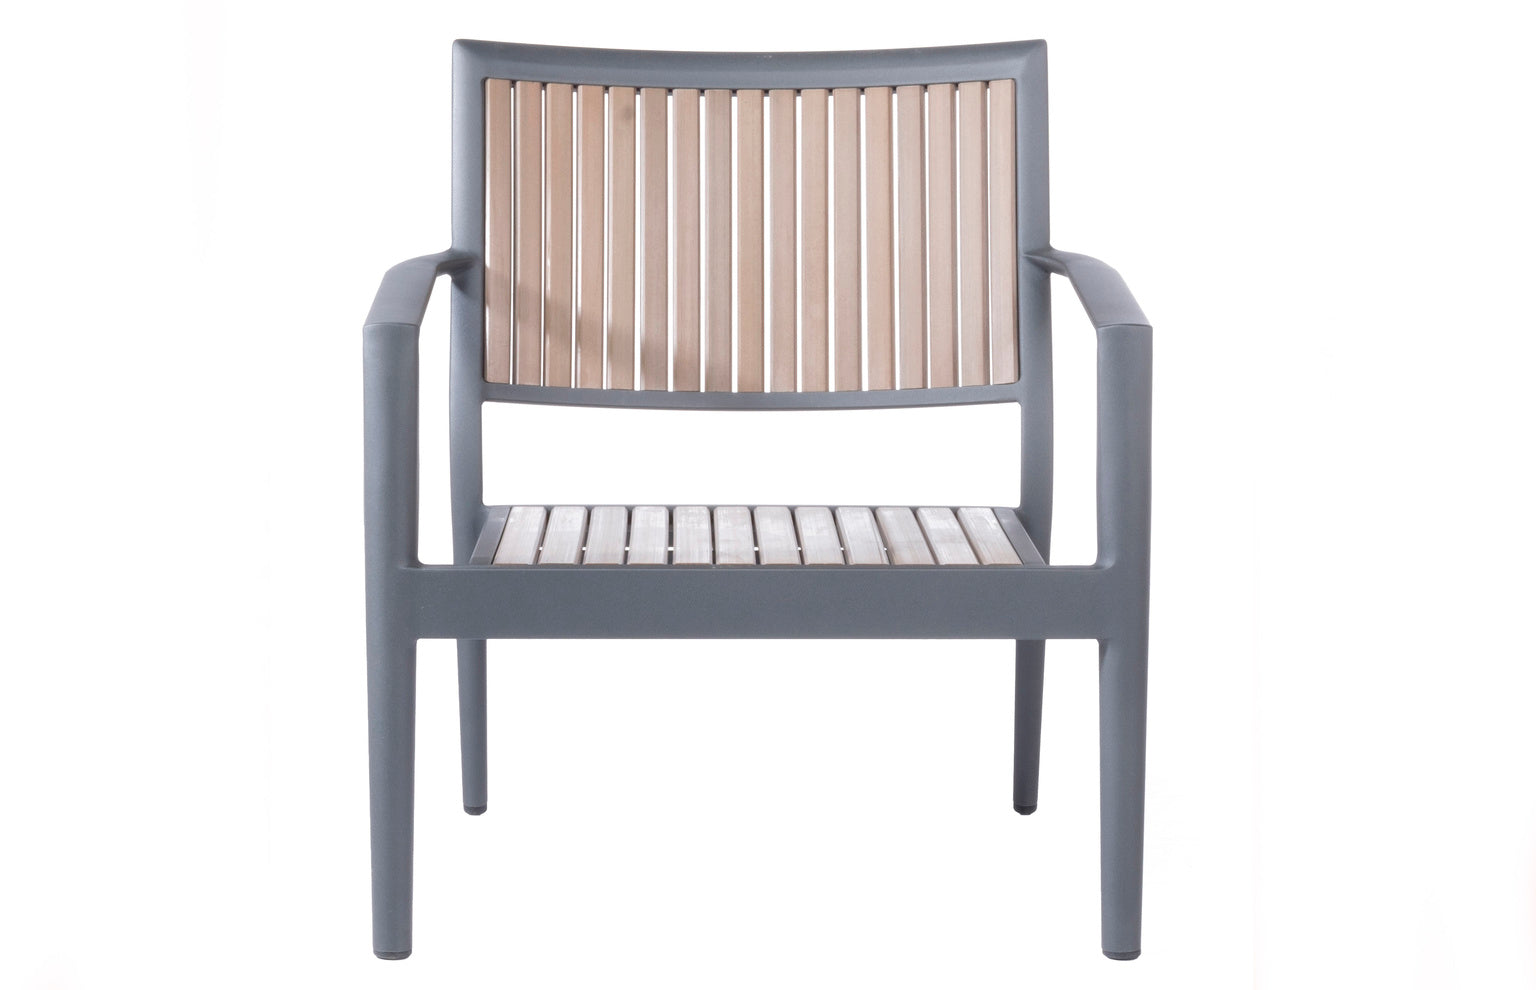 Alfresco Home Penelope Polywood and Aluminum Lounge Chair